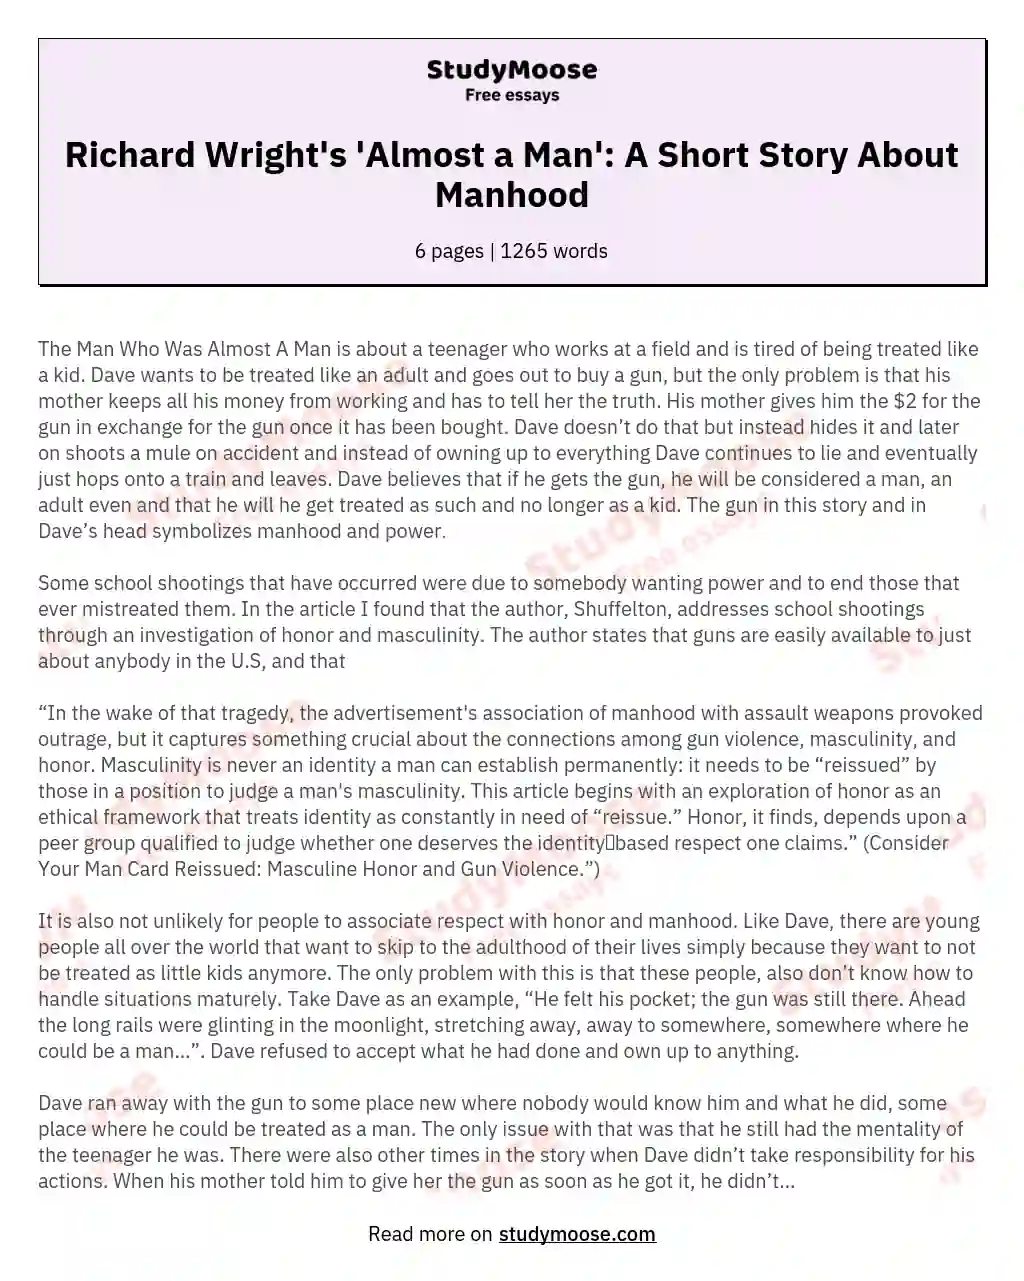 Richard Wright's 'Almost a Man': A Short Story About Manhood essay